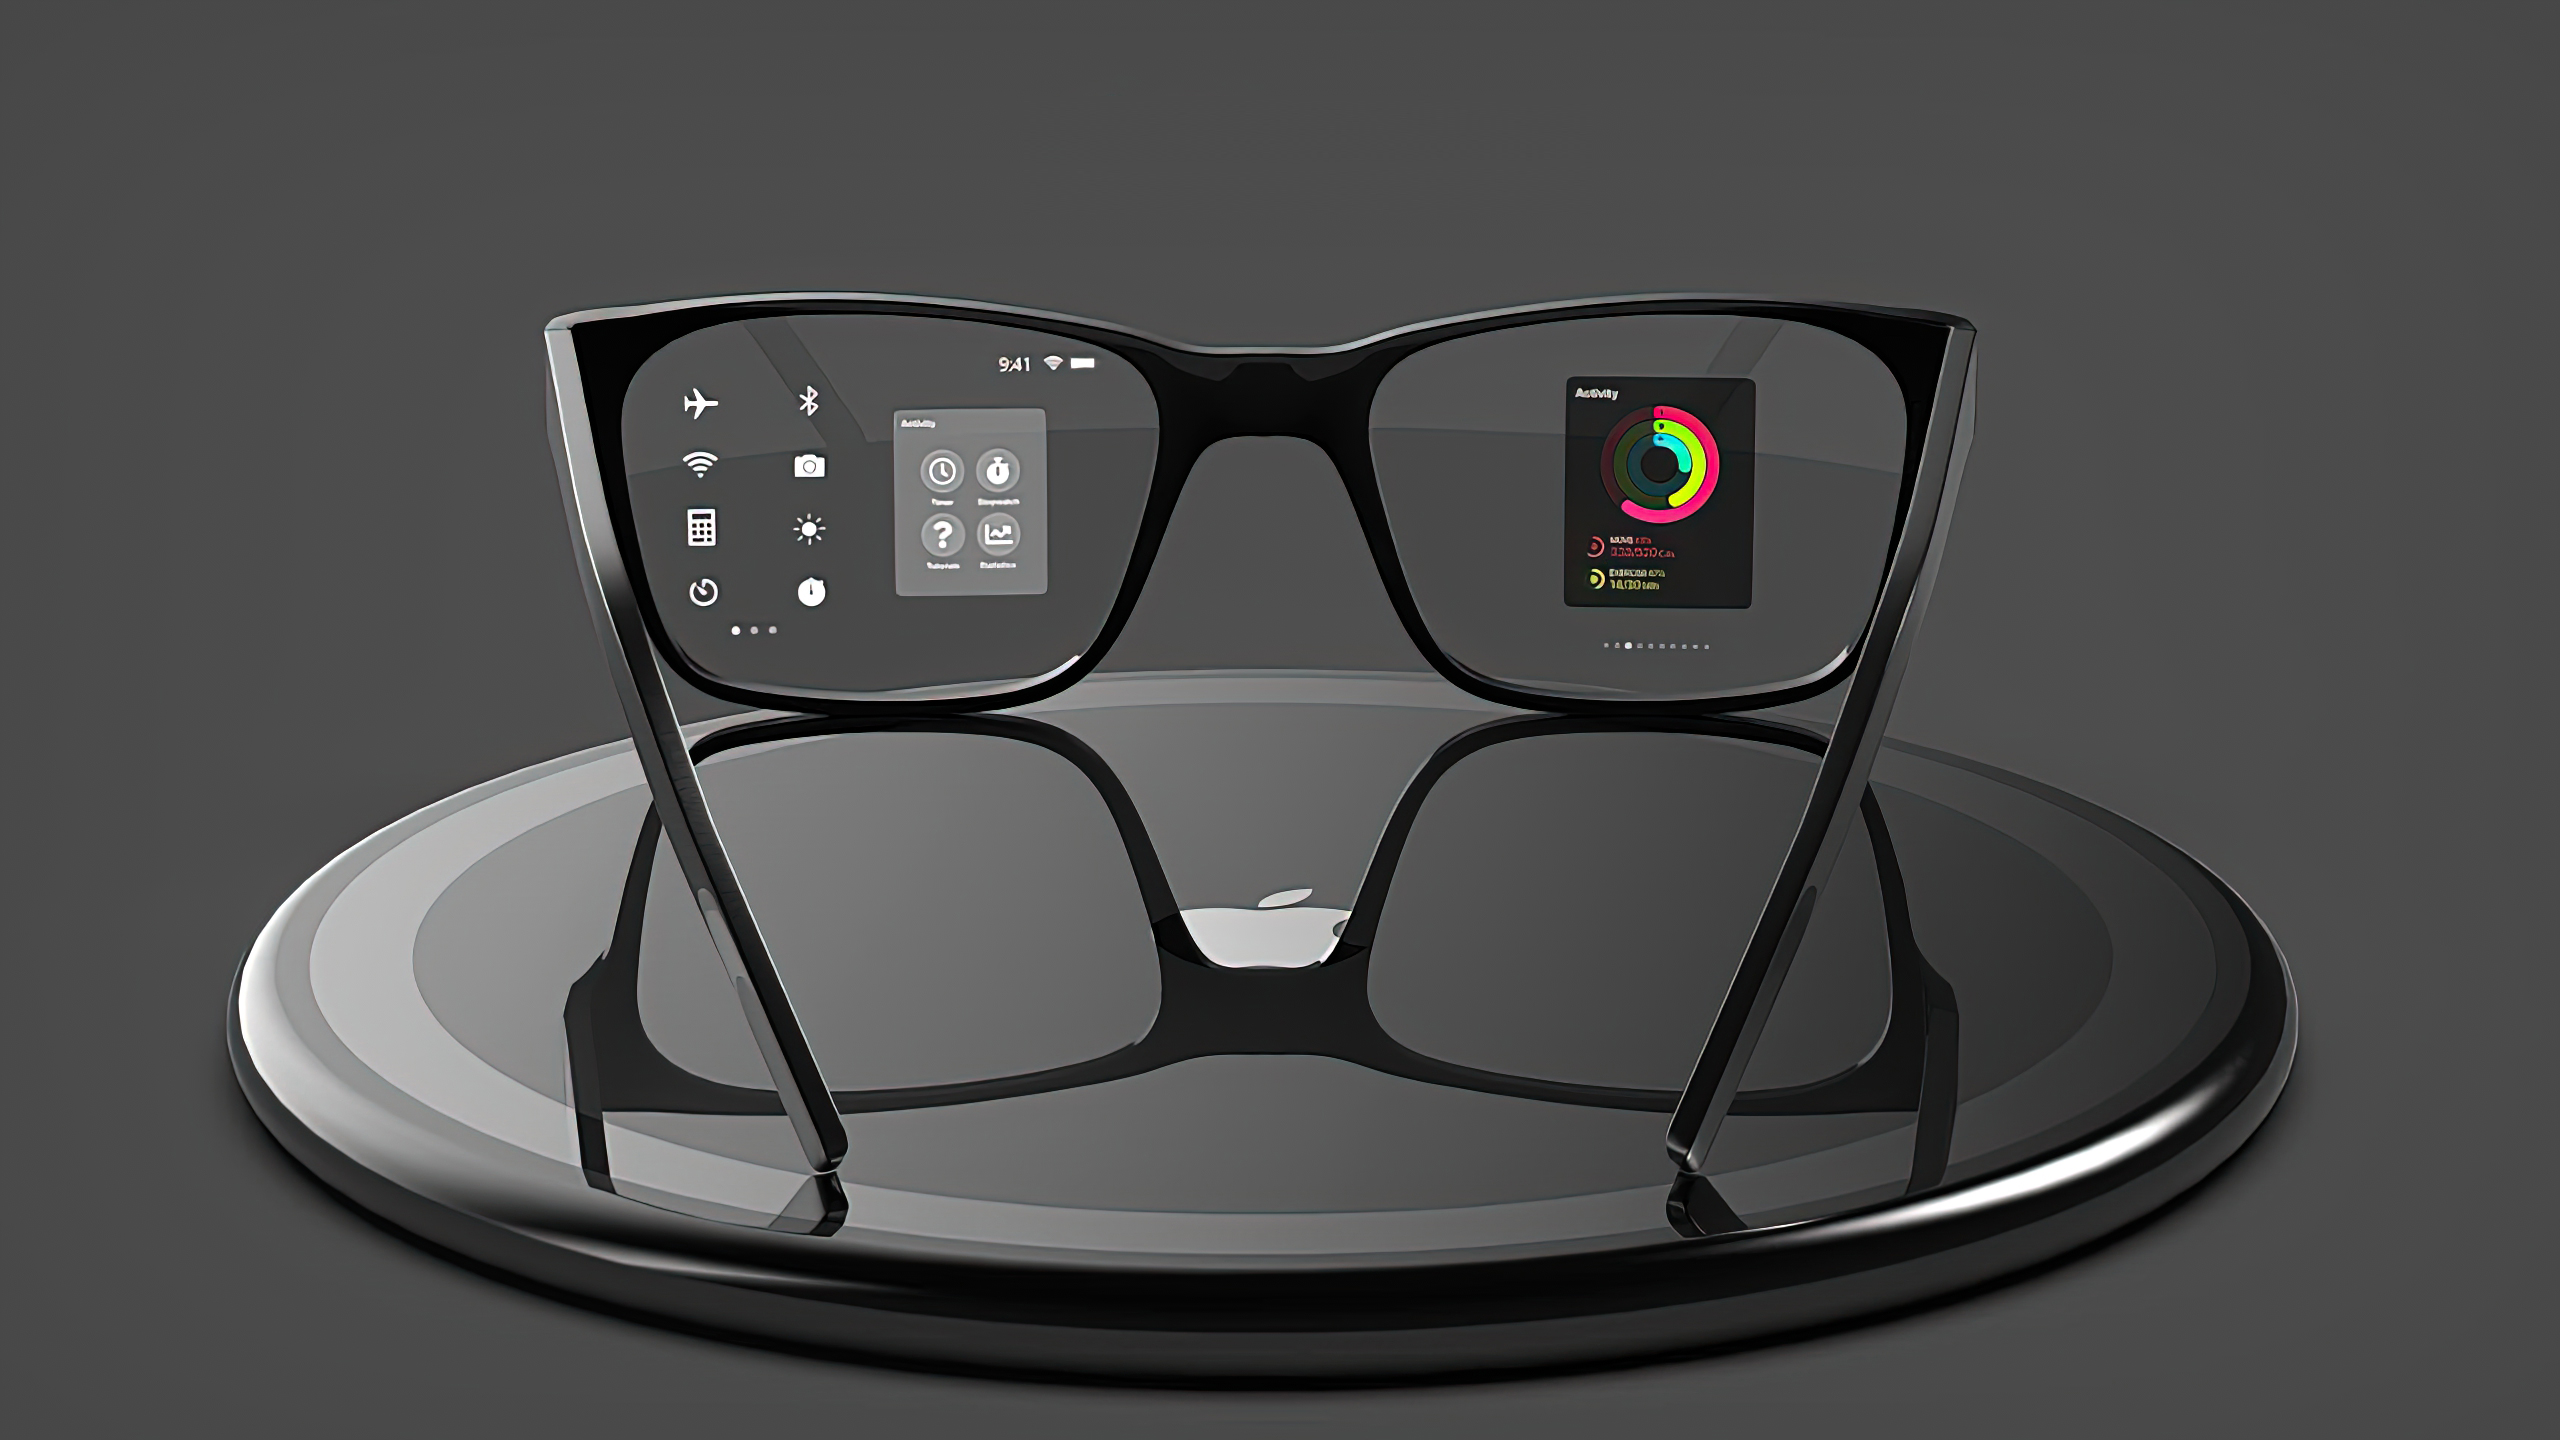 Apple's glasses for augmented reality